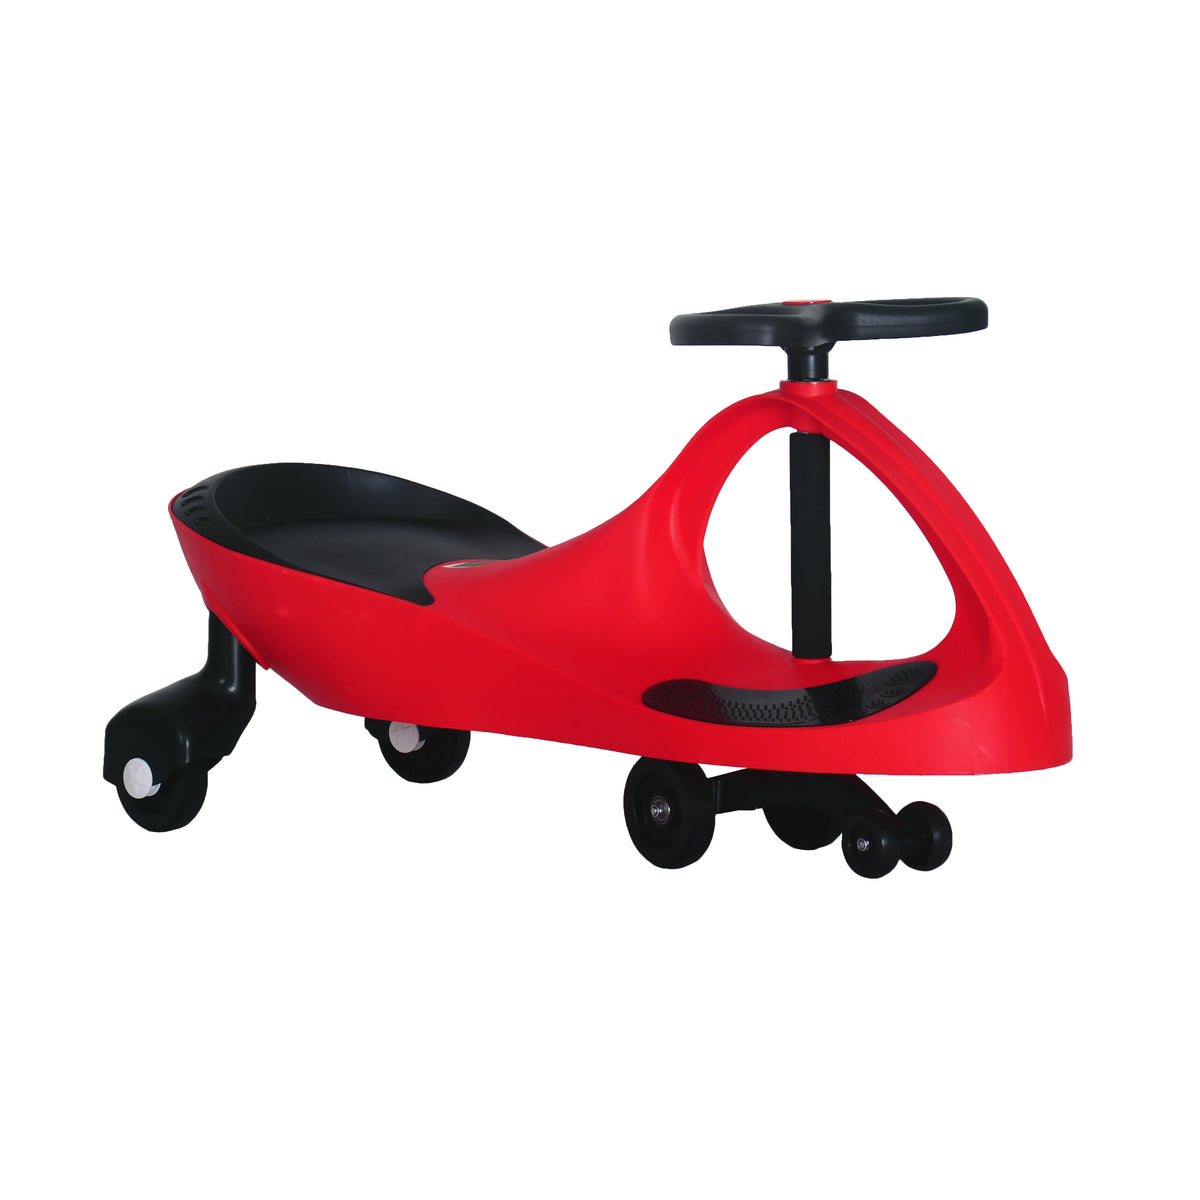 Ride-on Swing Car (Red) Peddle-free, Fun & Fast for Children